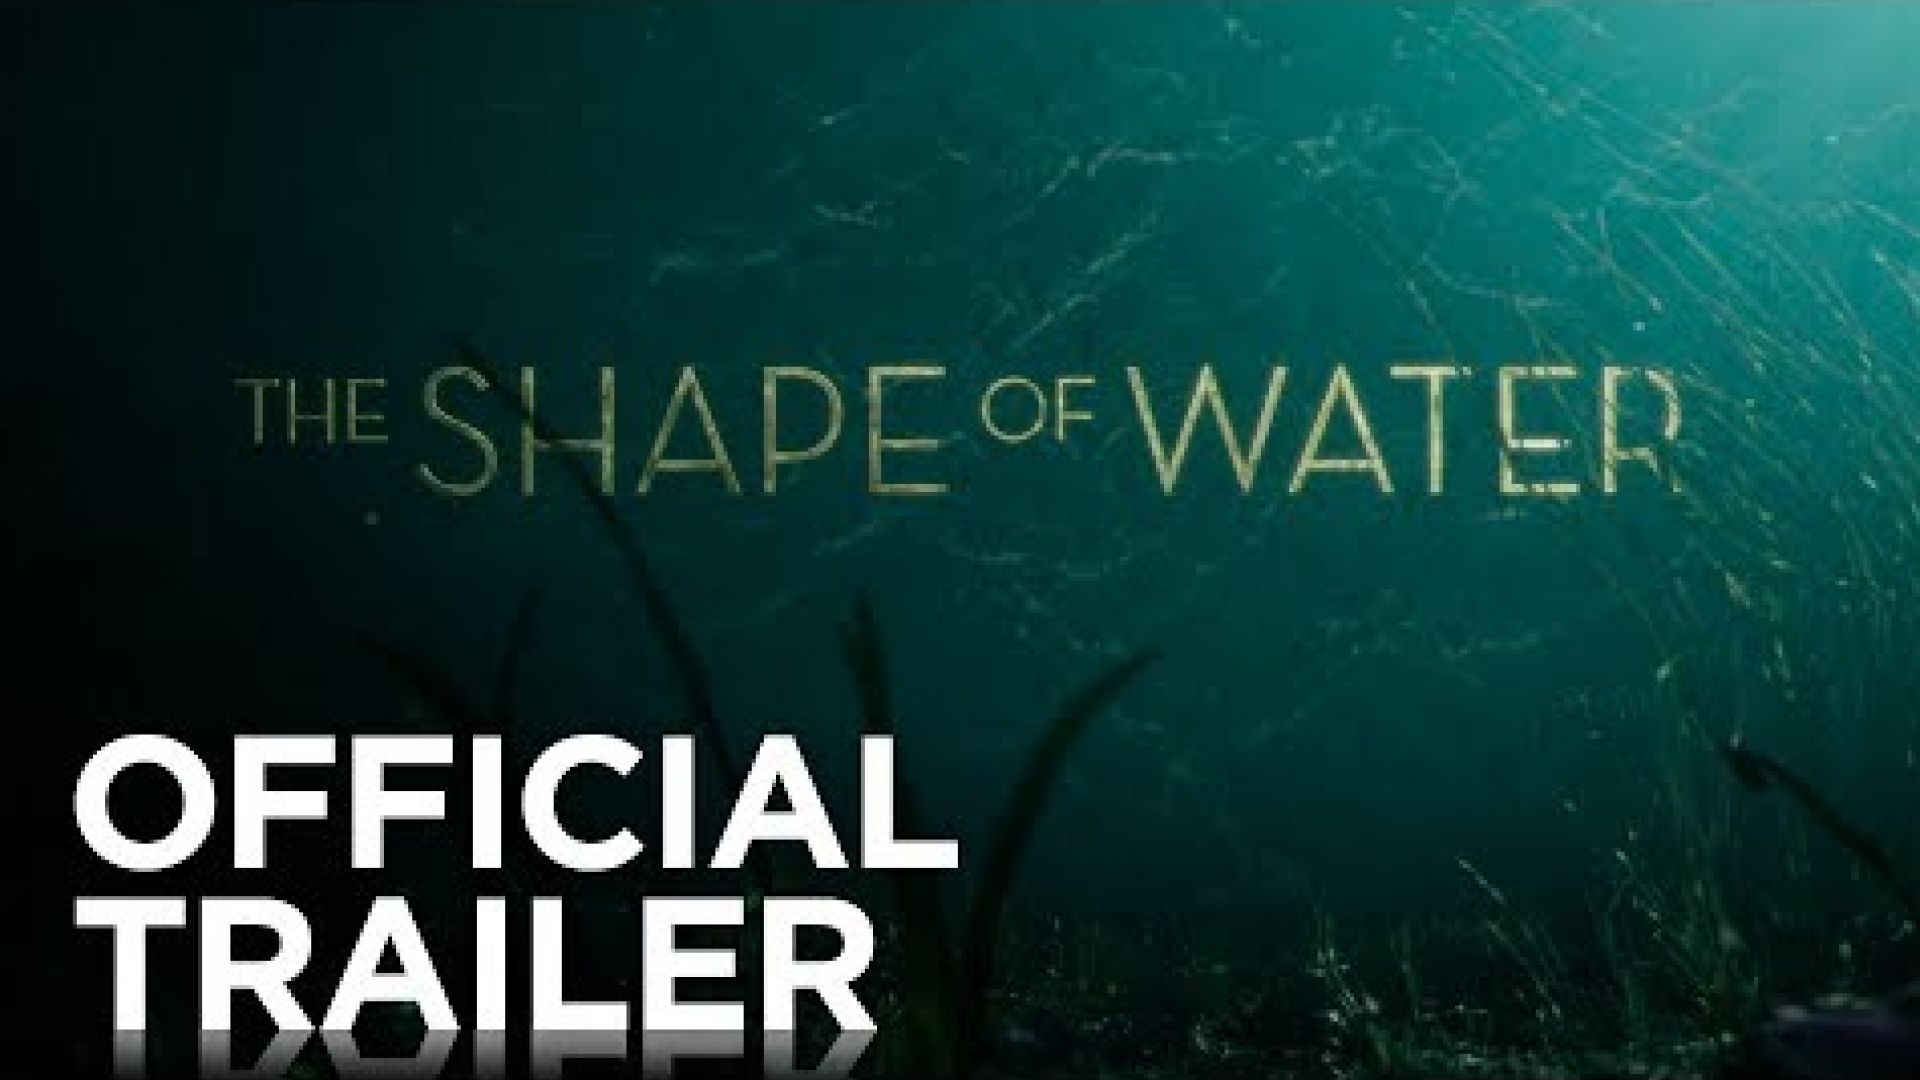 First trailer for Guillermo del Toro's 'The Shape of Water'.